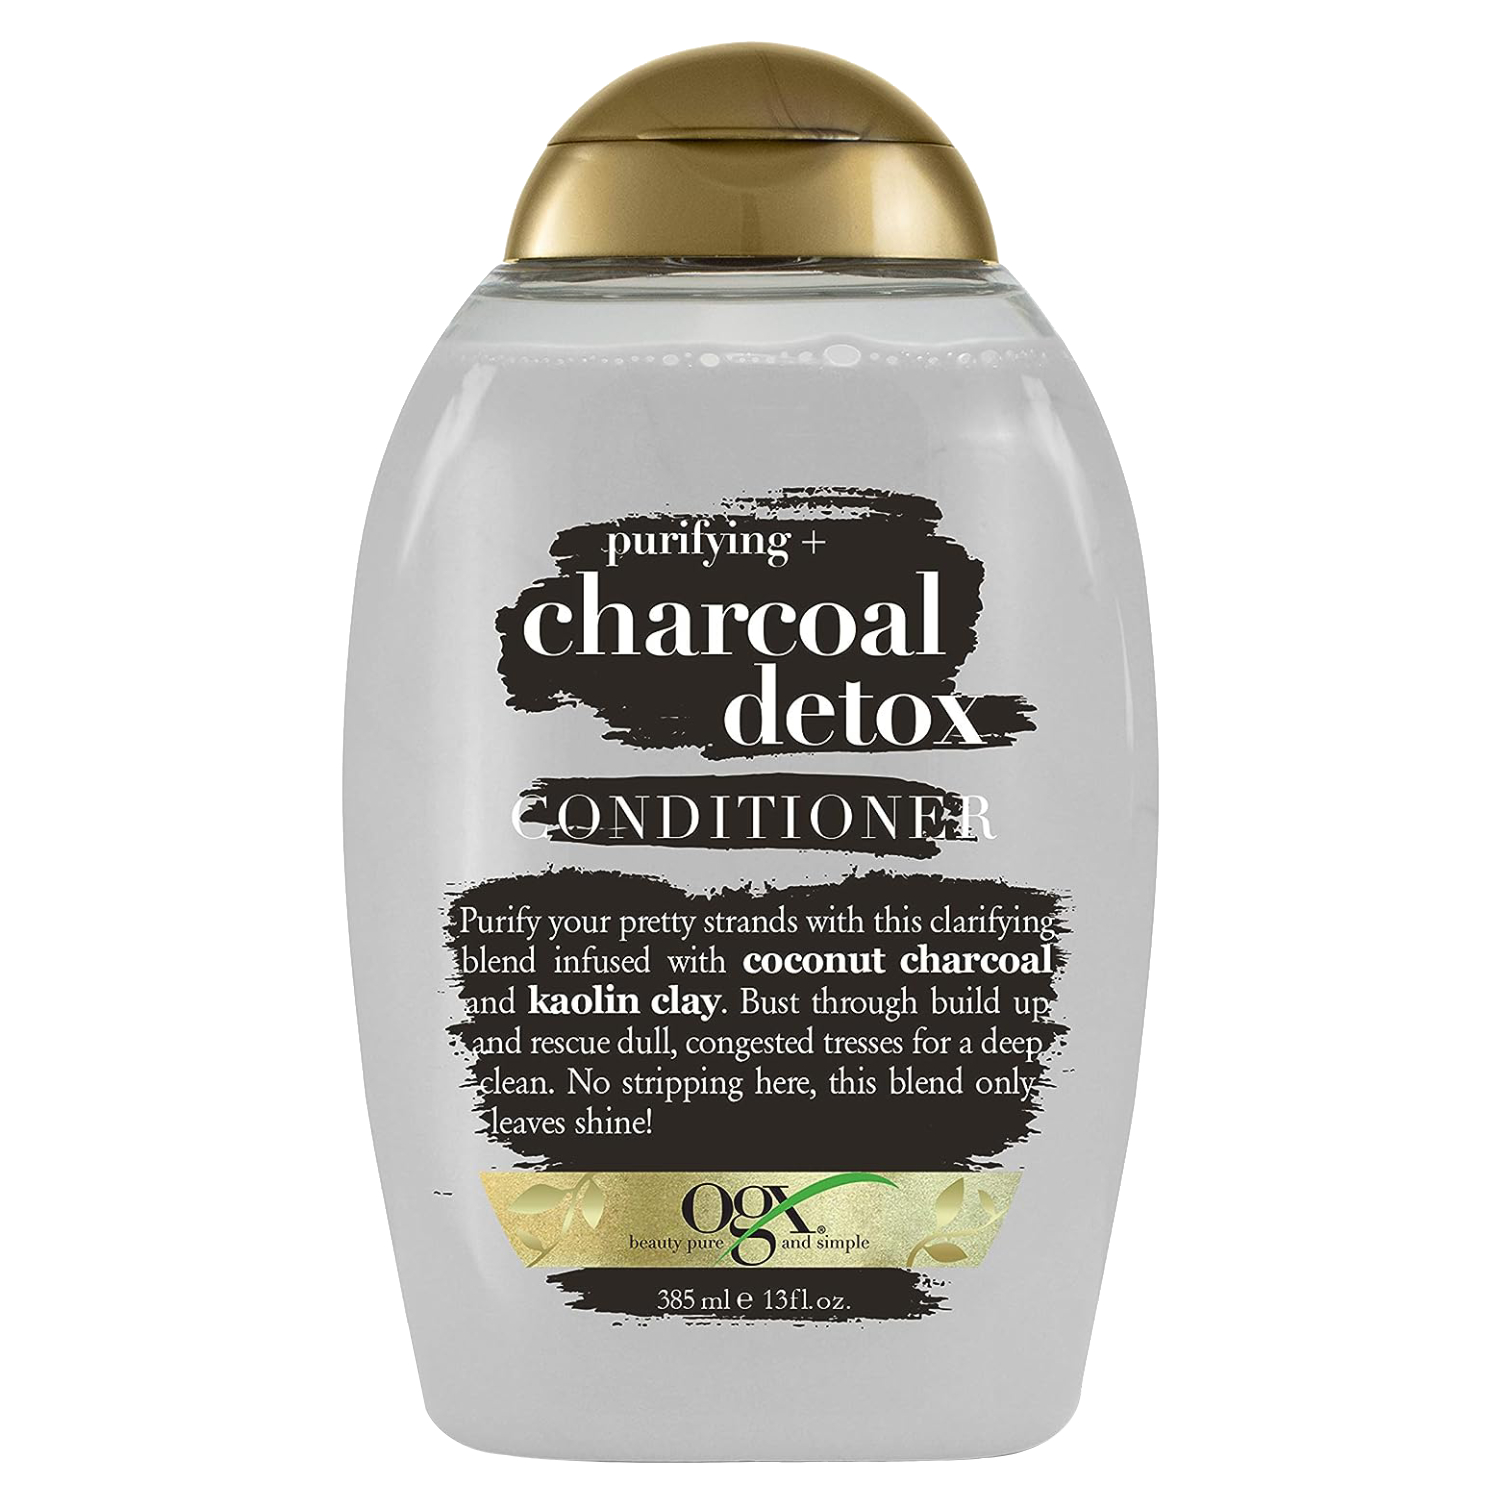 Back Image for OGX Purifying + Charcoal Detox Conditioner 385ml